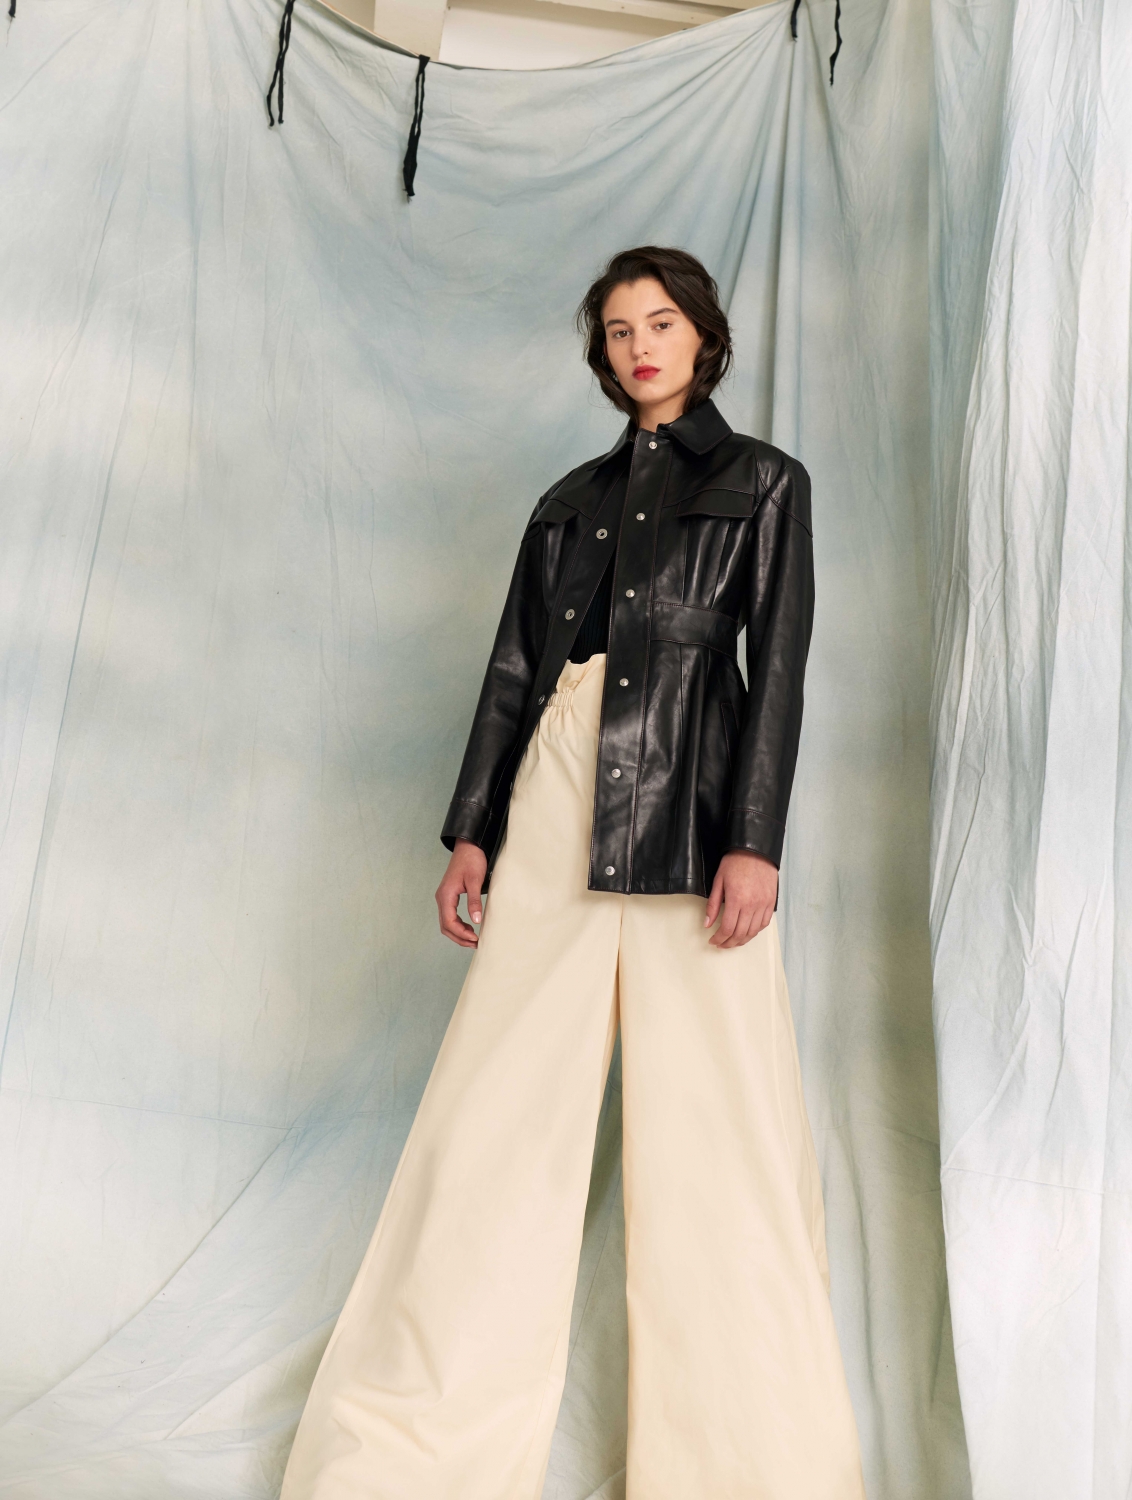 Elle UK | Trousers | Fashion | One Represents